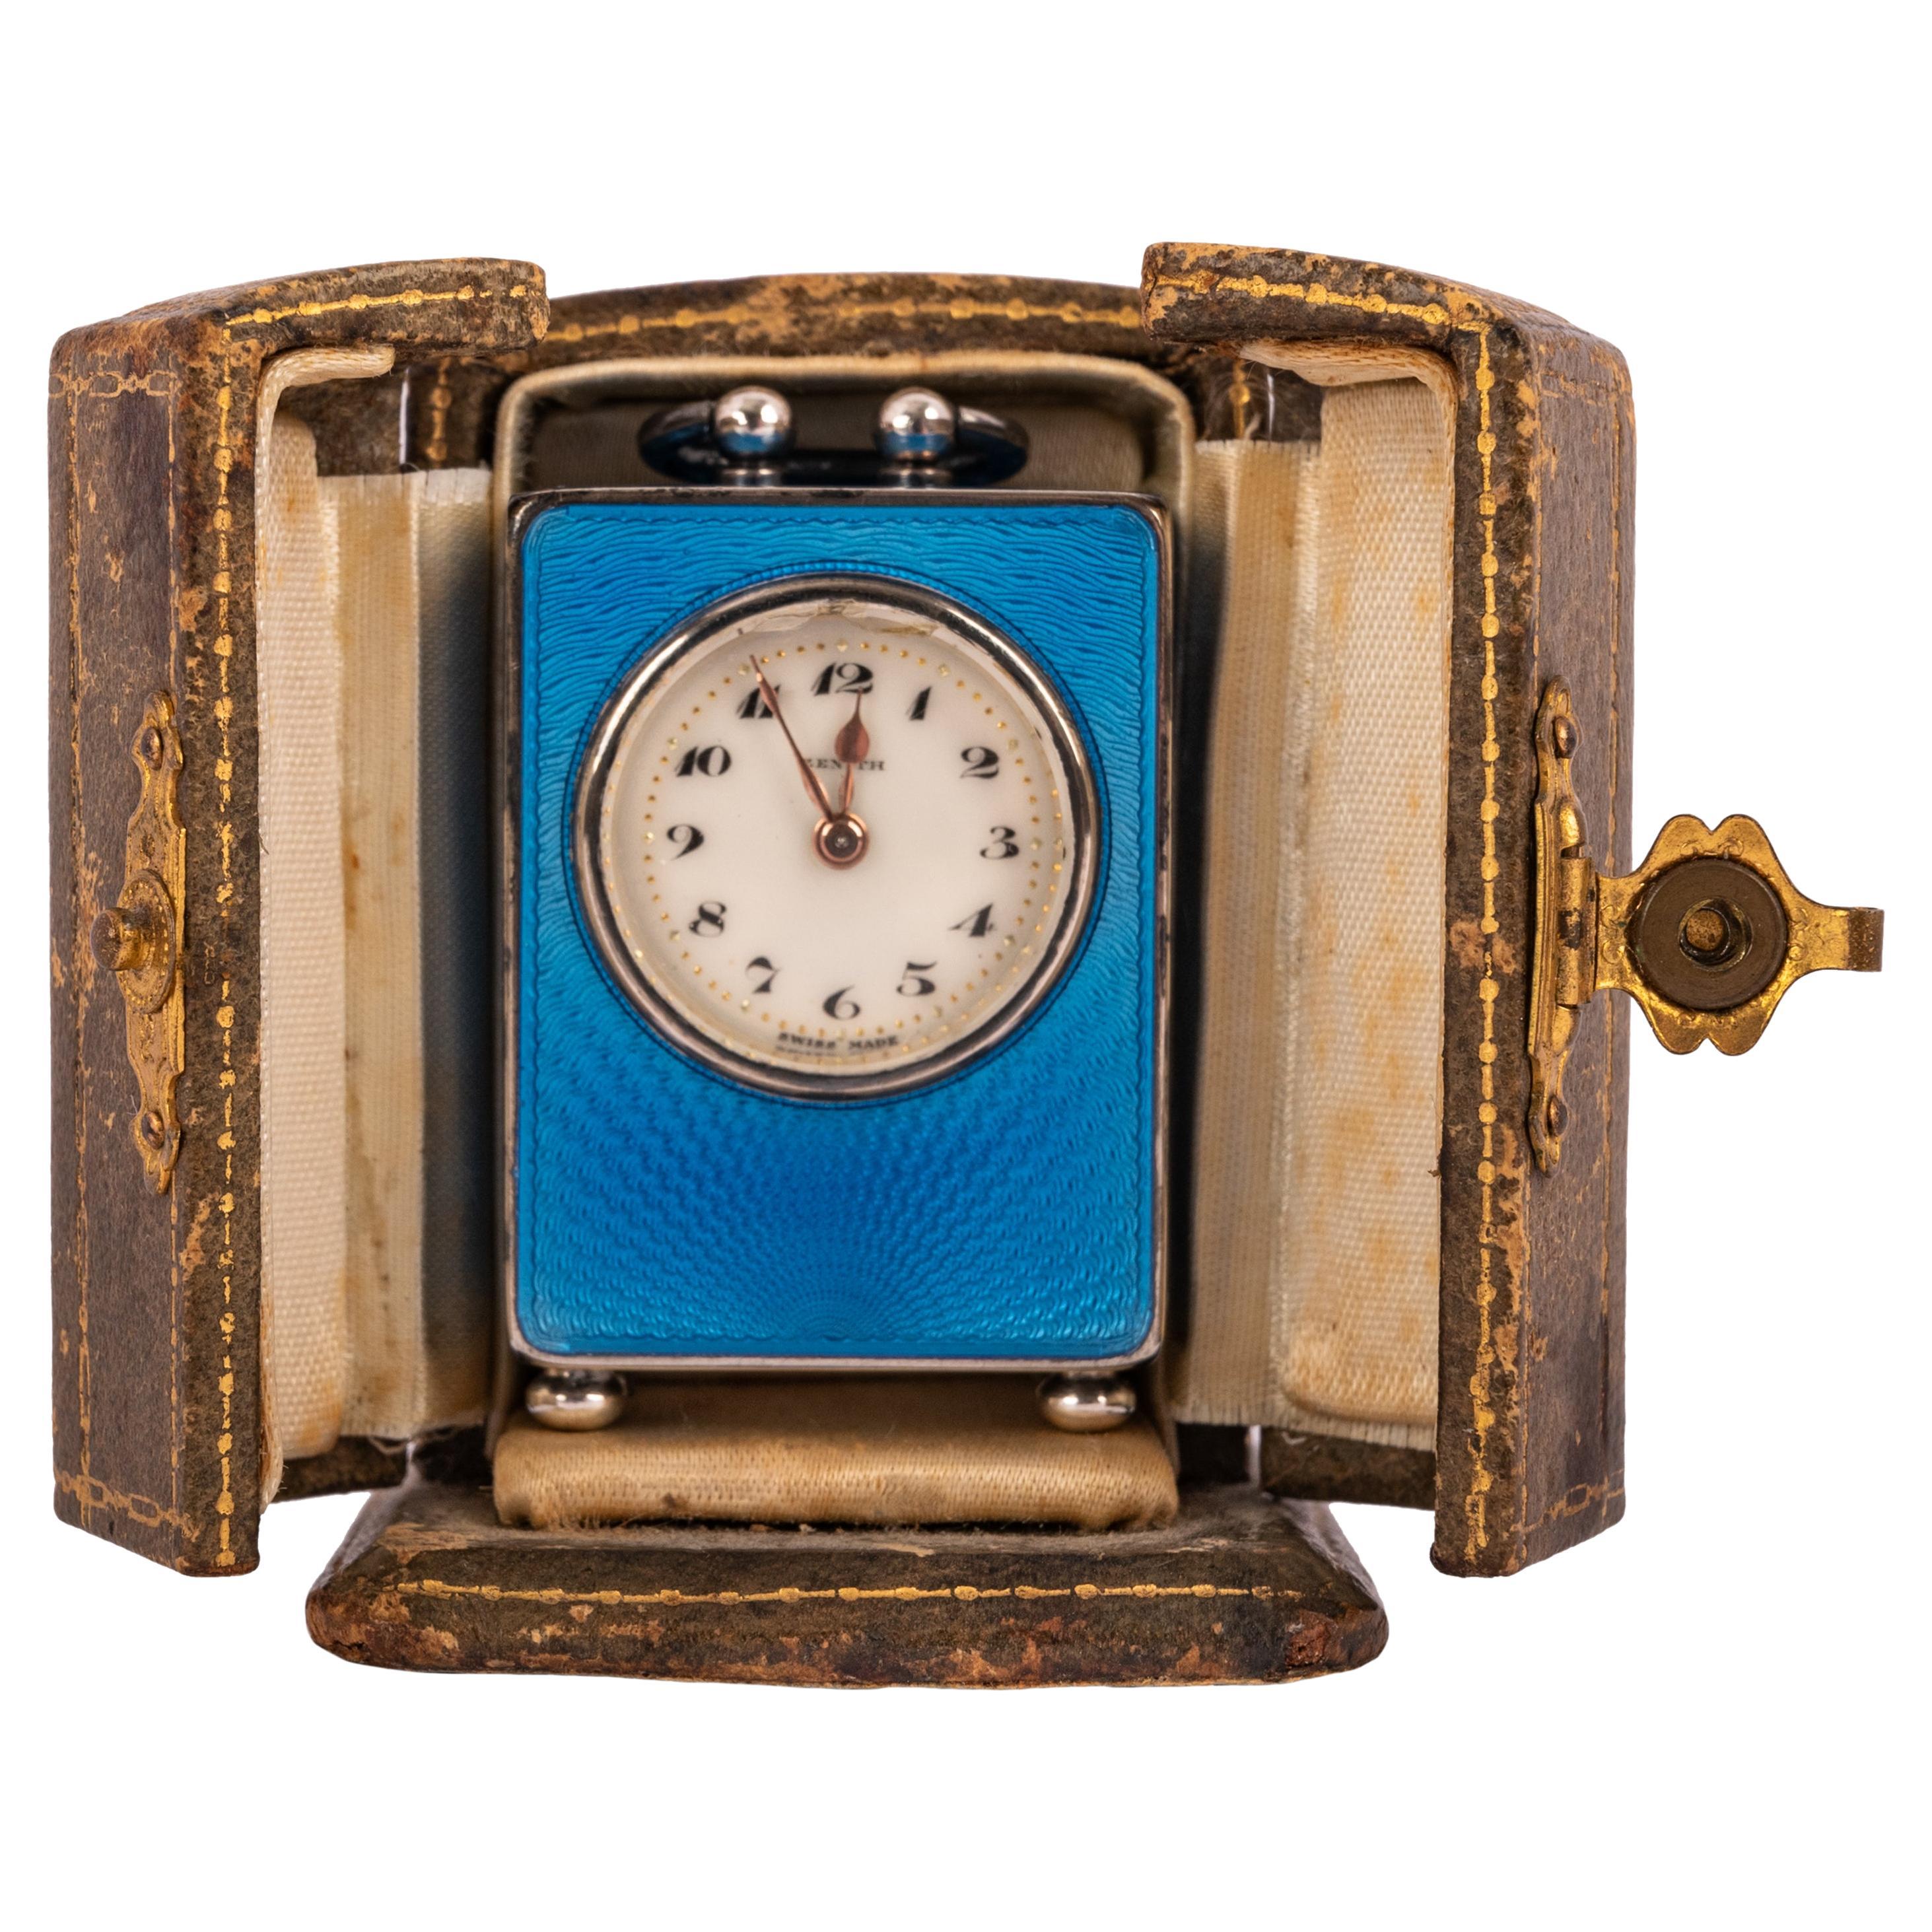 A fine & exceptional antique Swiss silver & Guilloche enamel miniature carriage clock & case, circa 1910.
The clock complete with the original leather case, made of sterling silver and beautiful blue guilloche enamel. The clock with an eight day